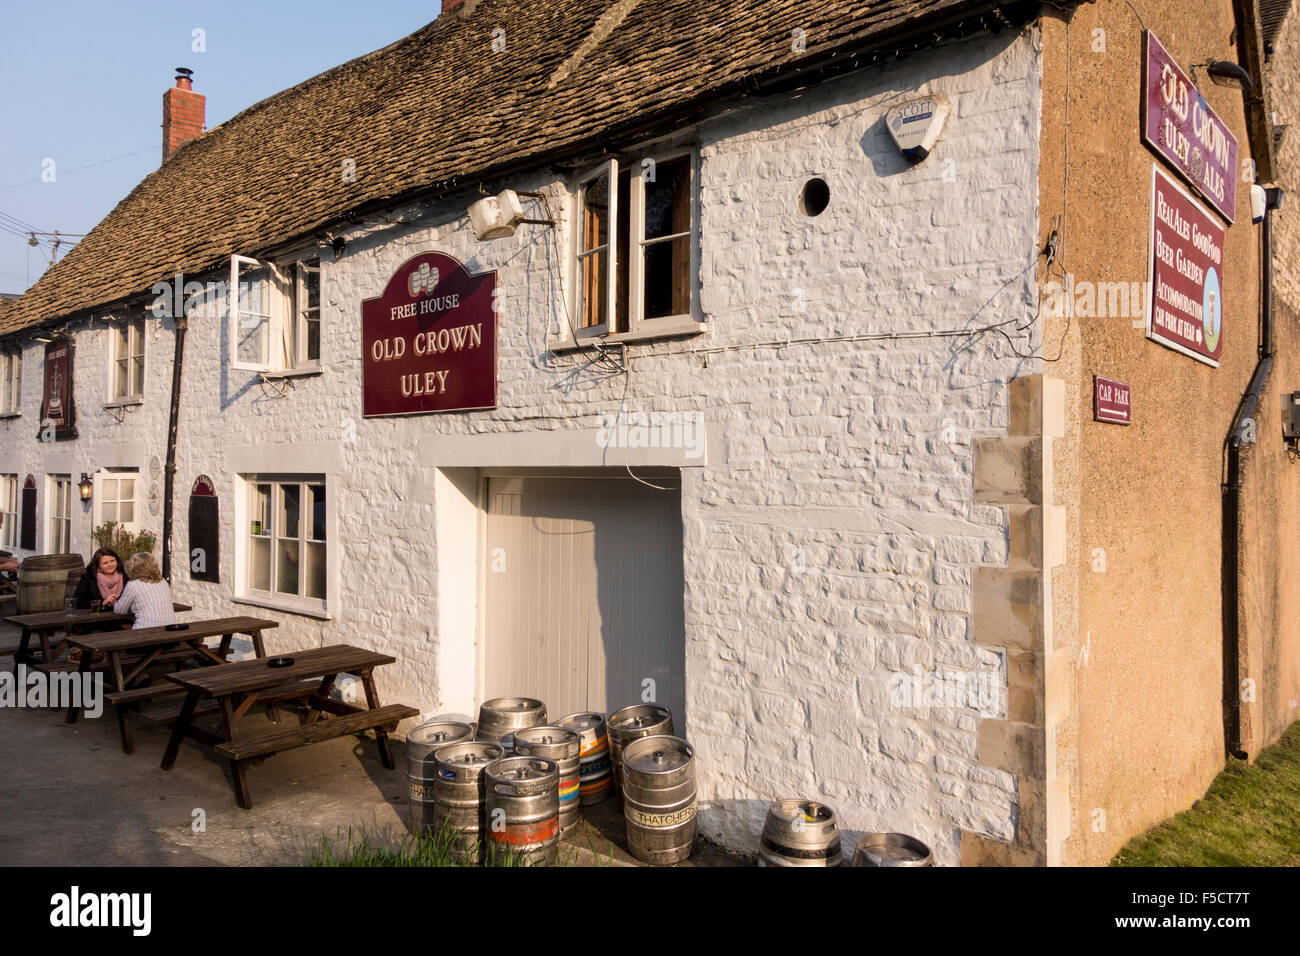 Old Crown pub in Uley, Gloucestershire, UK Stock Photo